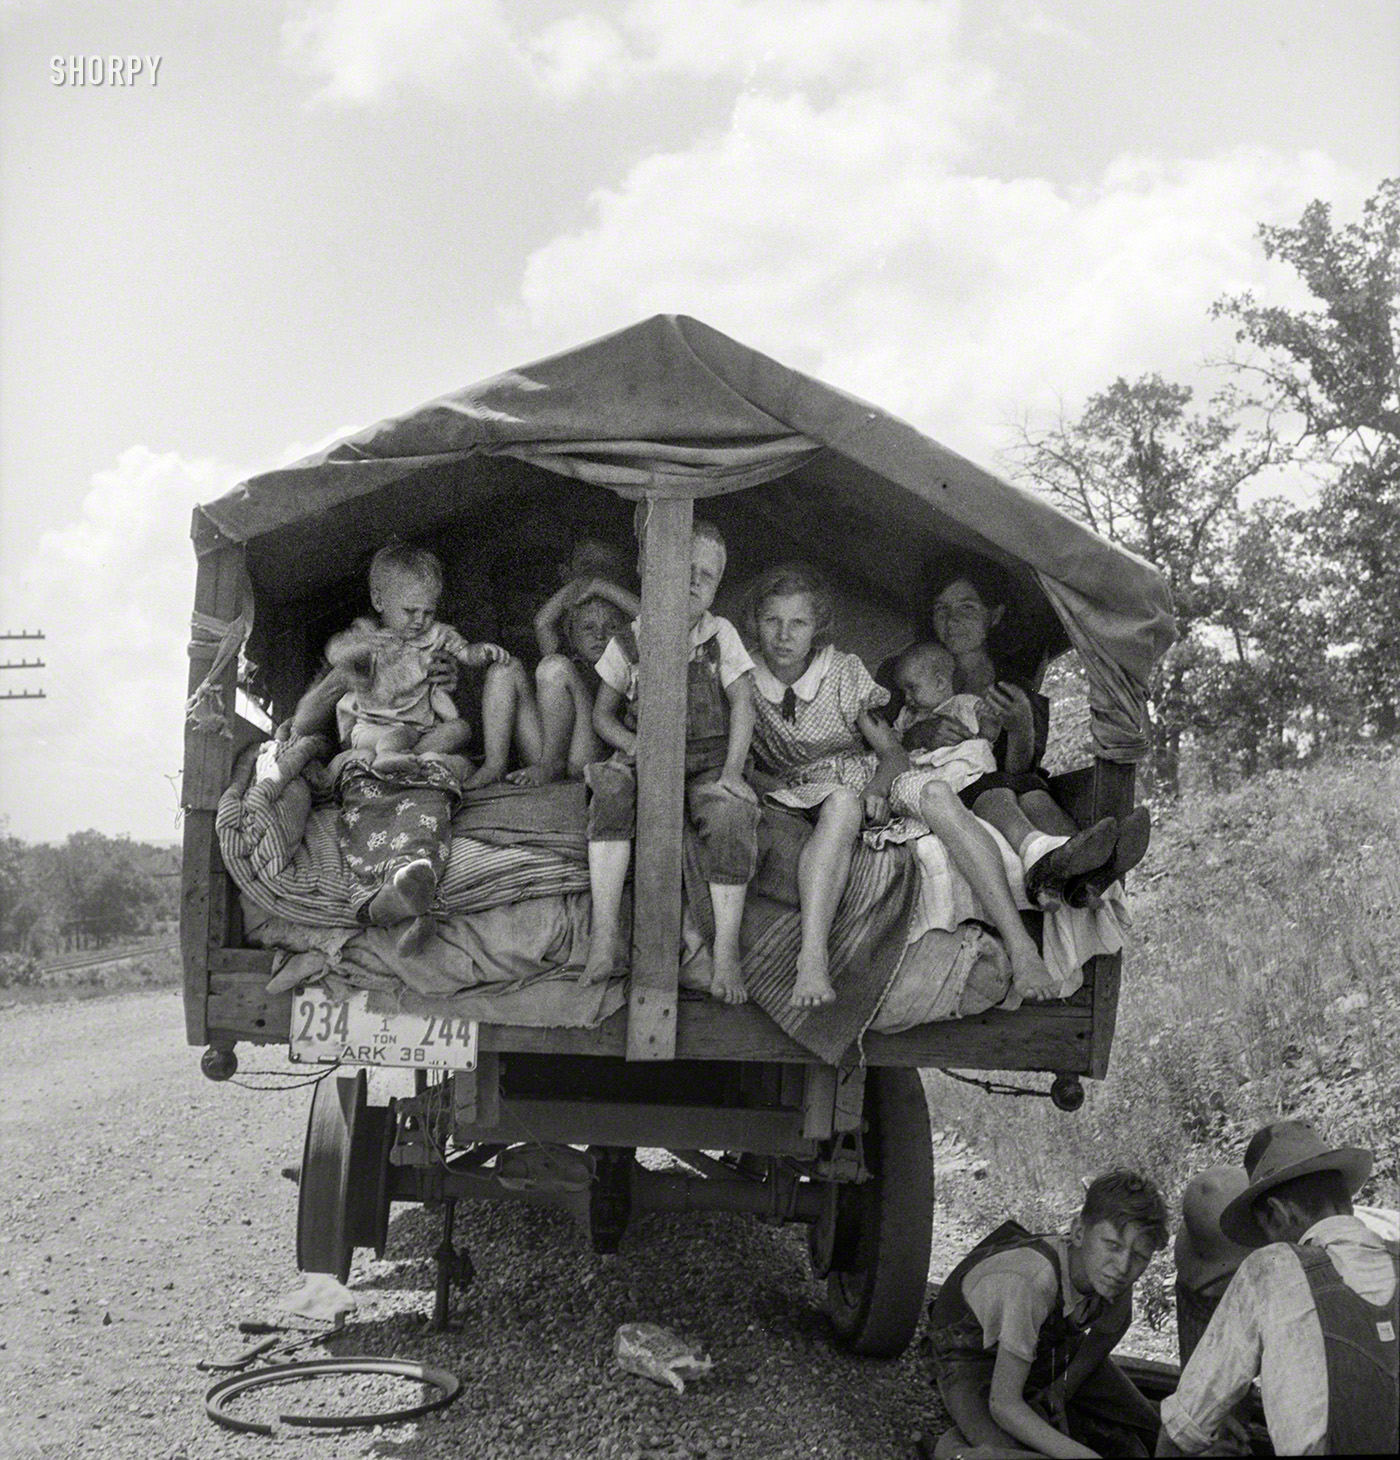 June 1938. "On highway No. 1 of the 'OK' state near Webbers Falls, Muskogee County, Oklahoma. Seven children and eldest son's family. Father was a blacksmith in Paris, Arkansas. Son was a tenant farmer. 'We're bound for Kingfisher (Oklahoma wheat) and Lubbock (Texas cotton). We're not trying to but we'll be in California yet. We're not going back to Arkansas; believe I can better myself'." Photo by Dorothea Lange for the Resettlement Admin. View full size.